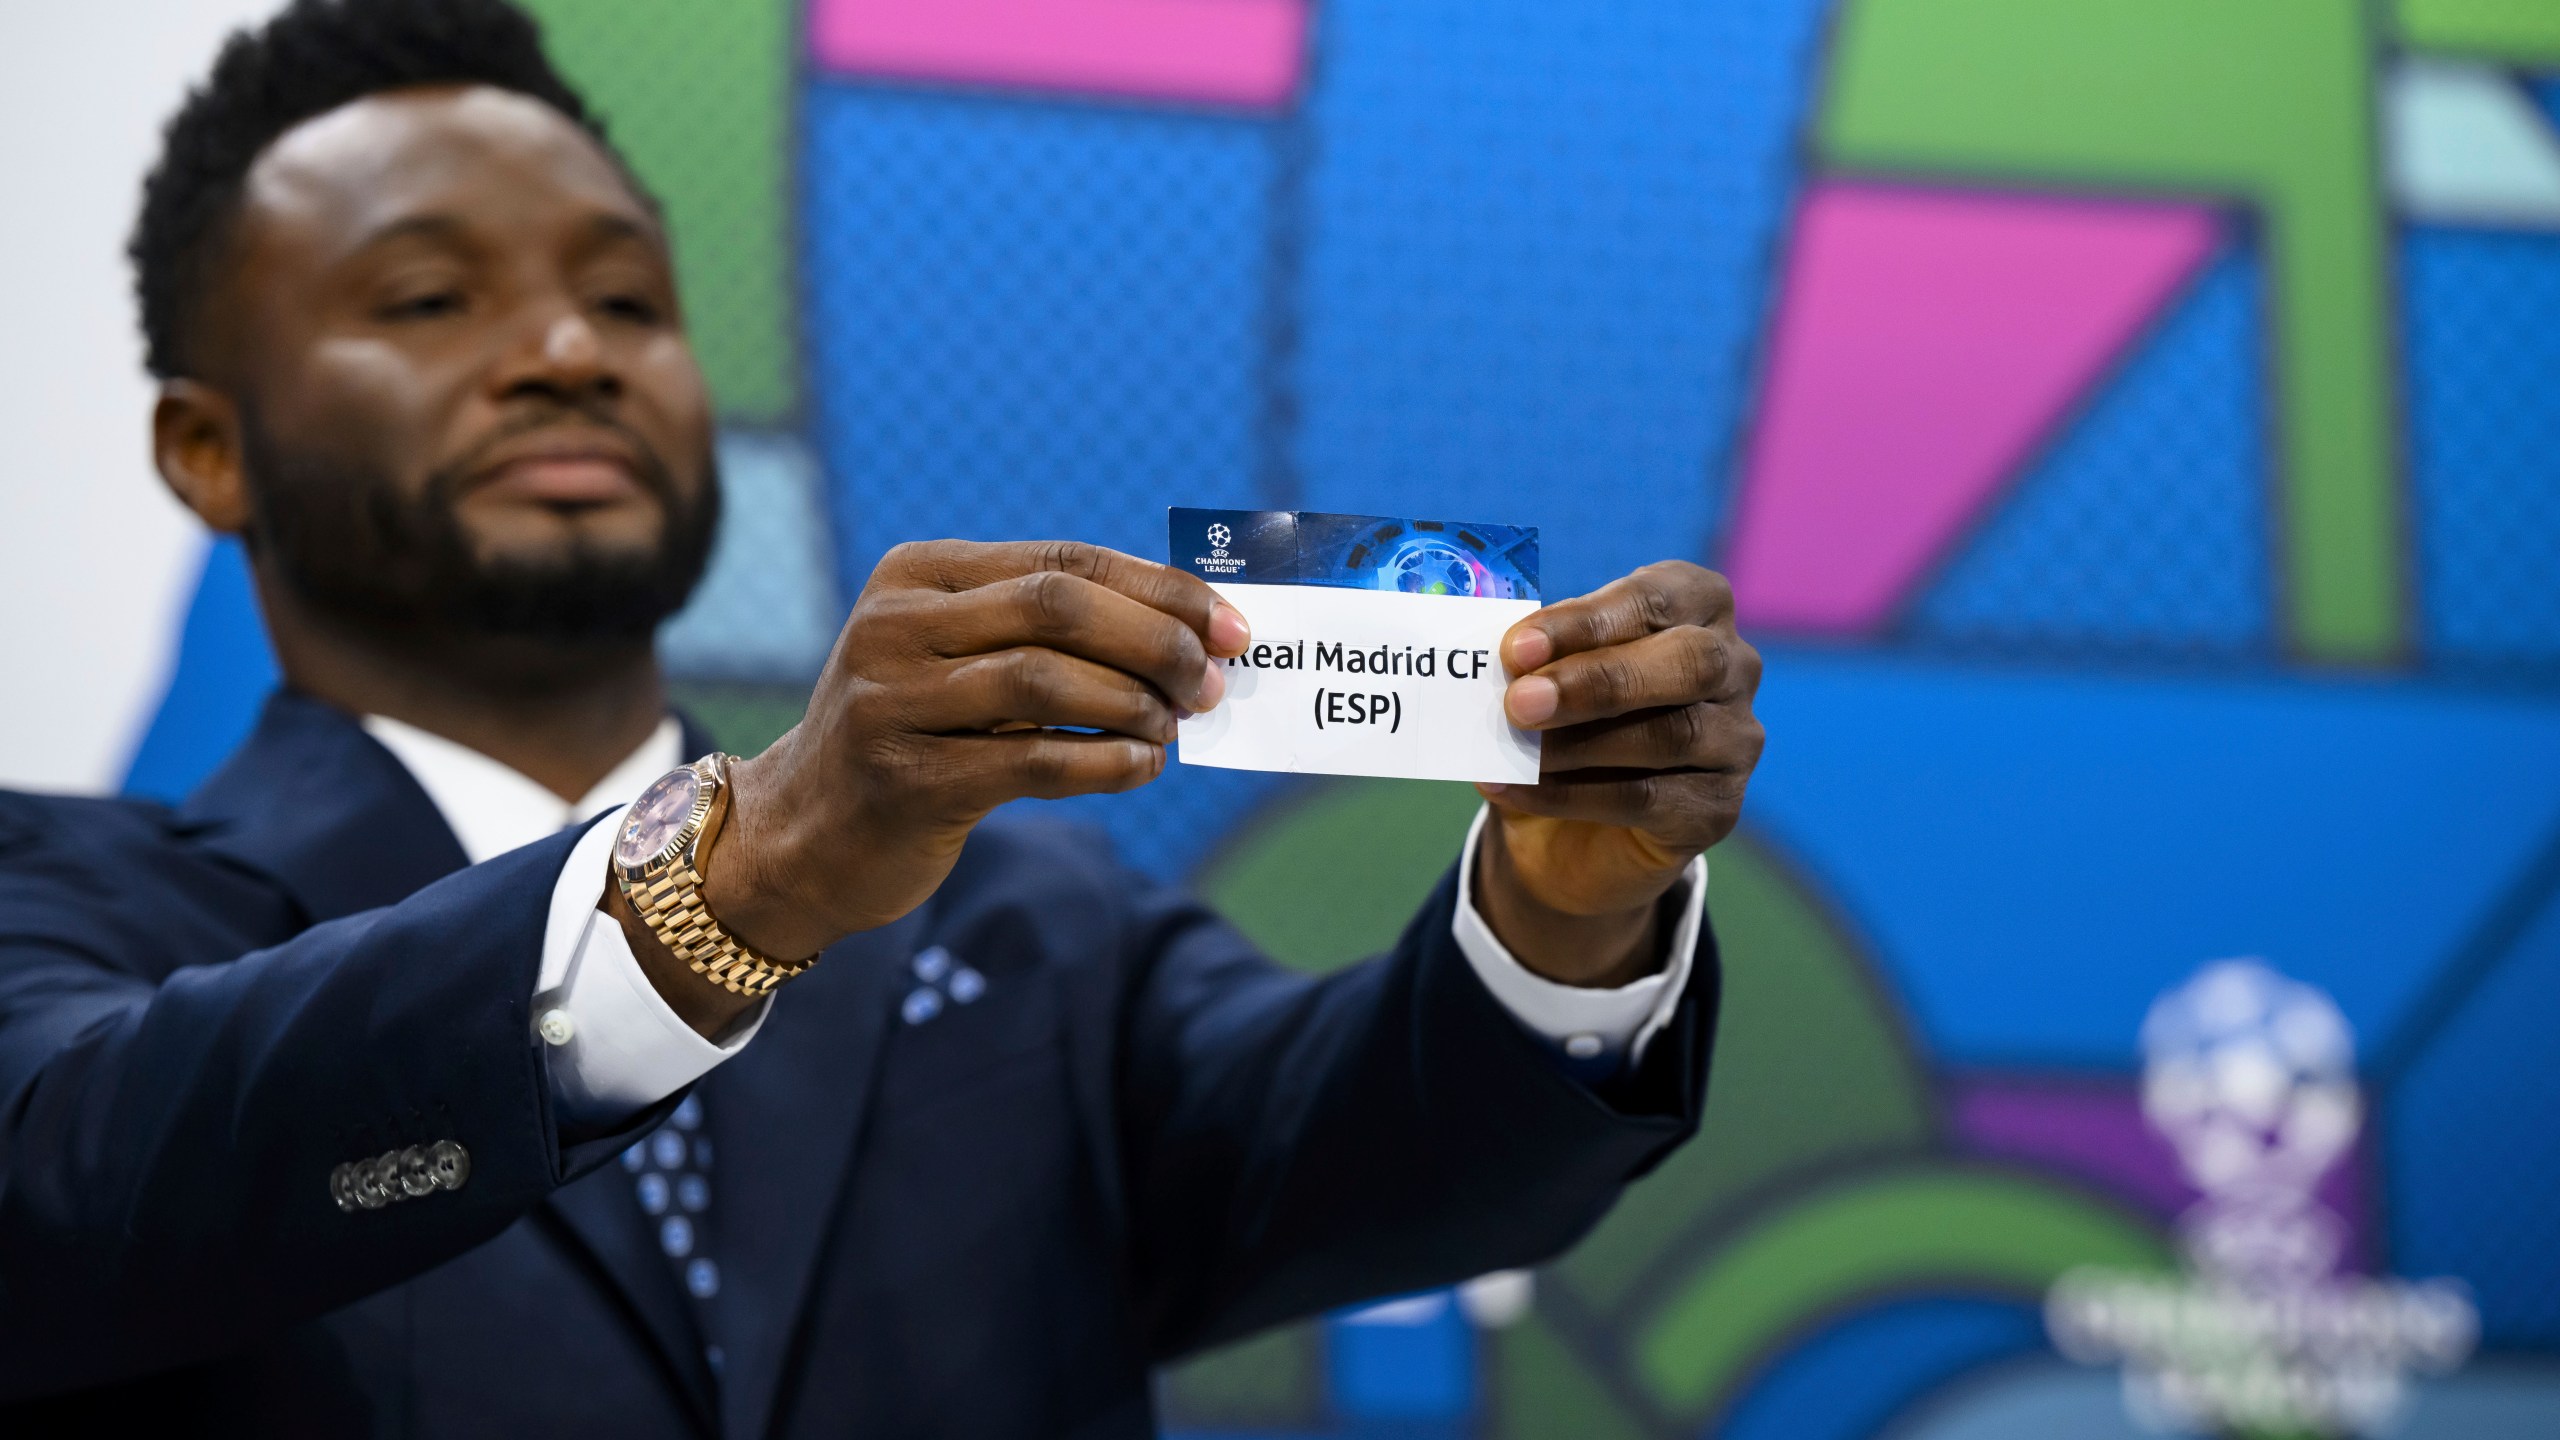 Former soccer player of Nigeria and ambassador for the UEFA Champions League final in London John Obi Mikel shows a ticket with Spanish soccer team Real Madrid CF name during the quarter-final draw of the UEFA Champions League 2023/24, at the UEFA Headquarters in Nyon, Switzerland, Friday, March 15, 2024. Real Madrid CF will face Manchester City FC in the quarter-final of the 2023/2024 UEFA Champions League. (Jean-Christophe Bott/Keystone via AP)